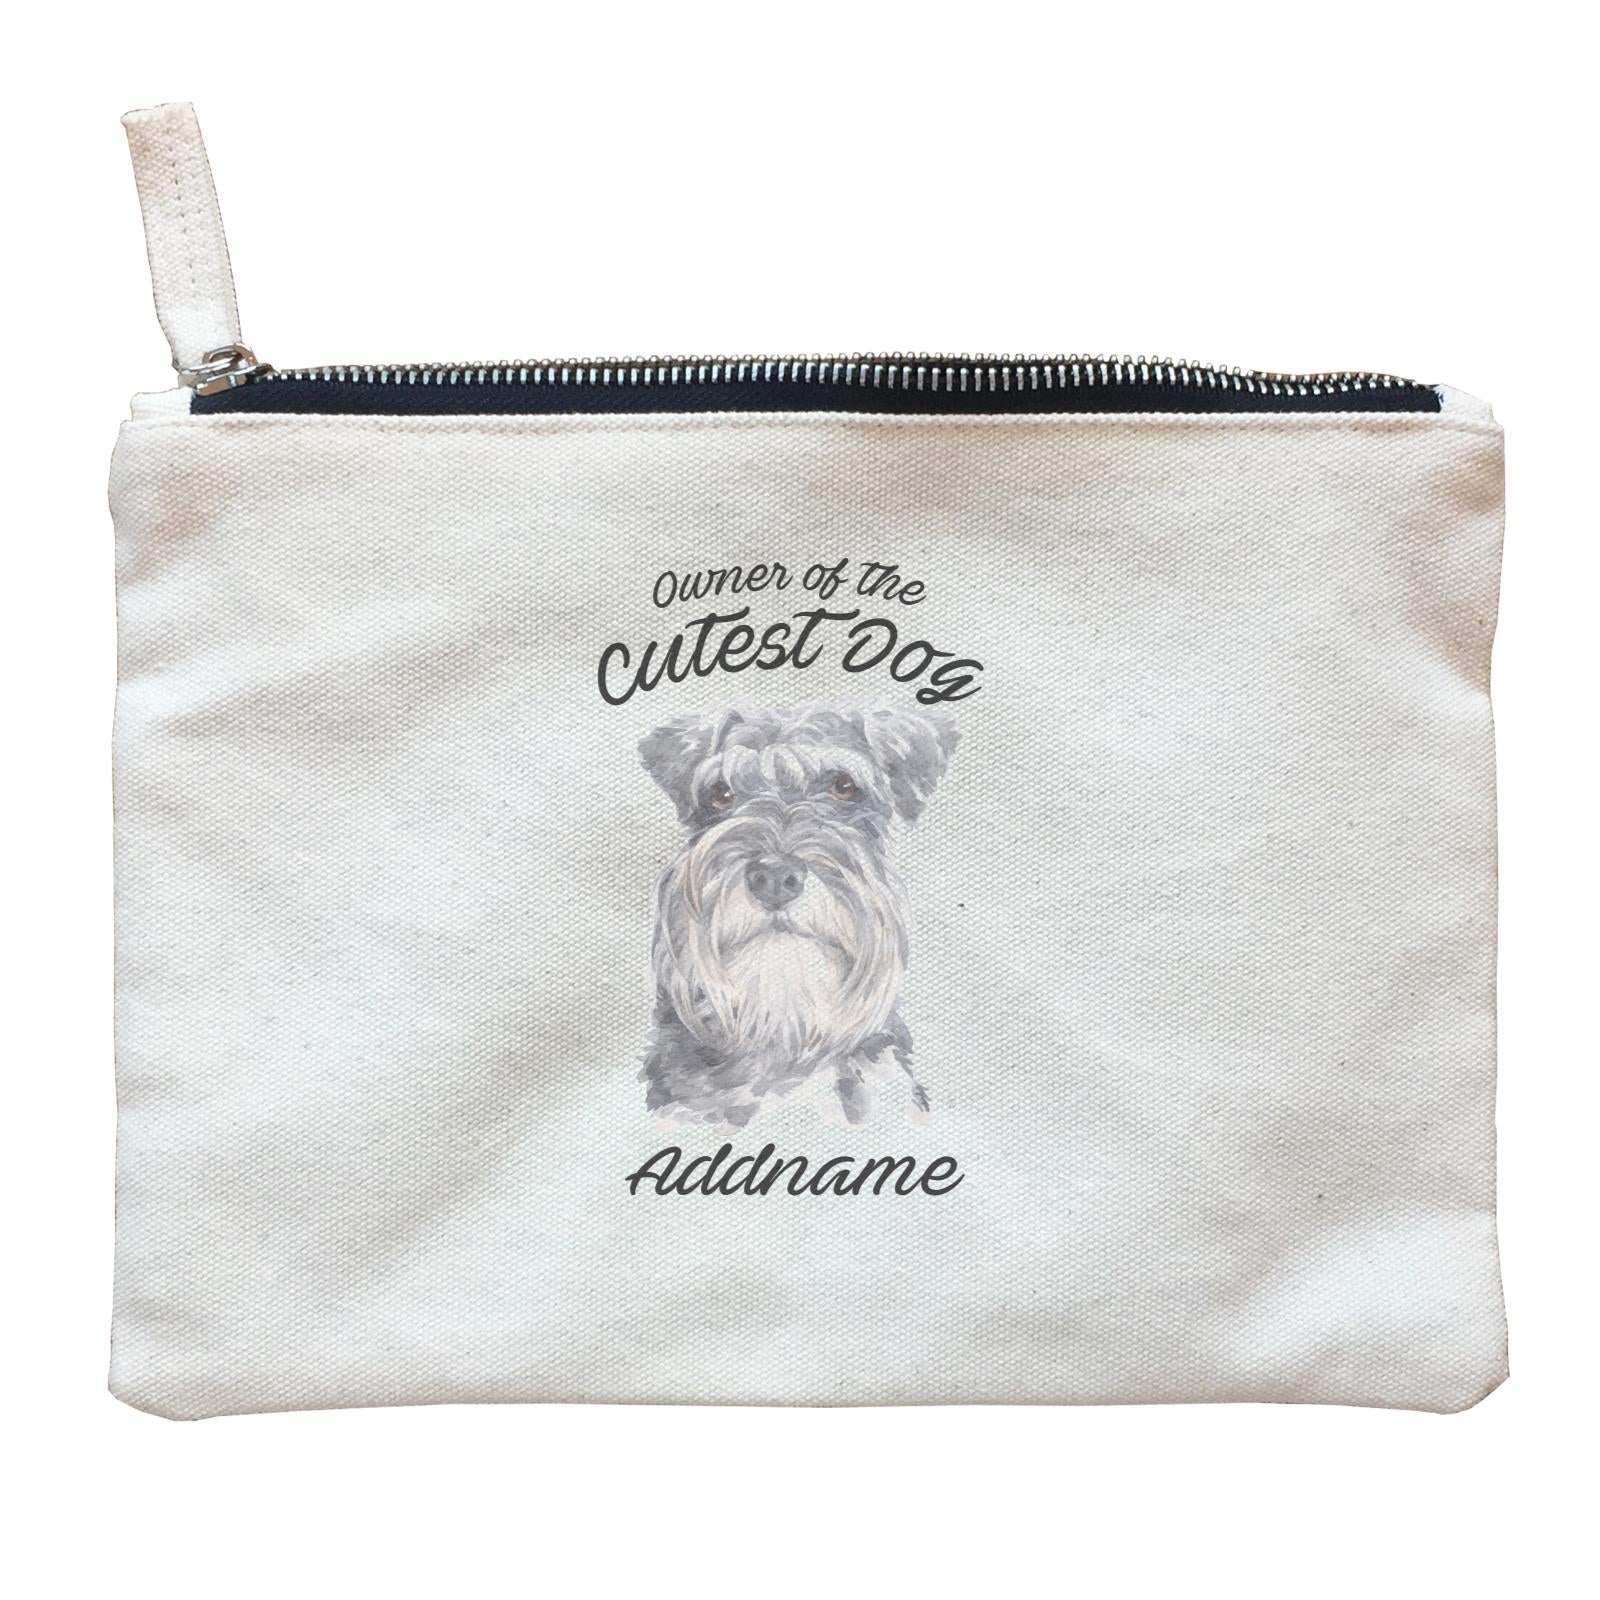 Watercolor Dog Owner Of The Cutest Dog Schnauzer Addname Zipper Pouch